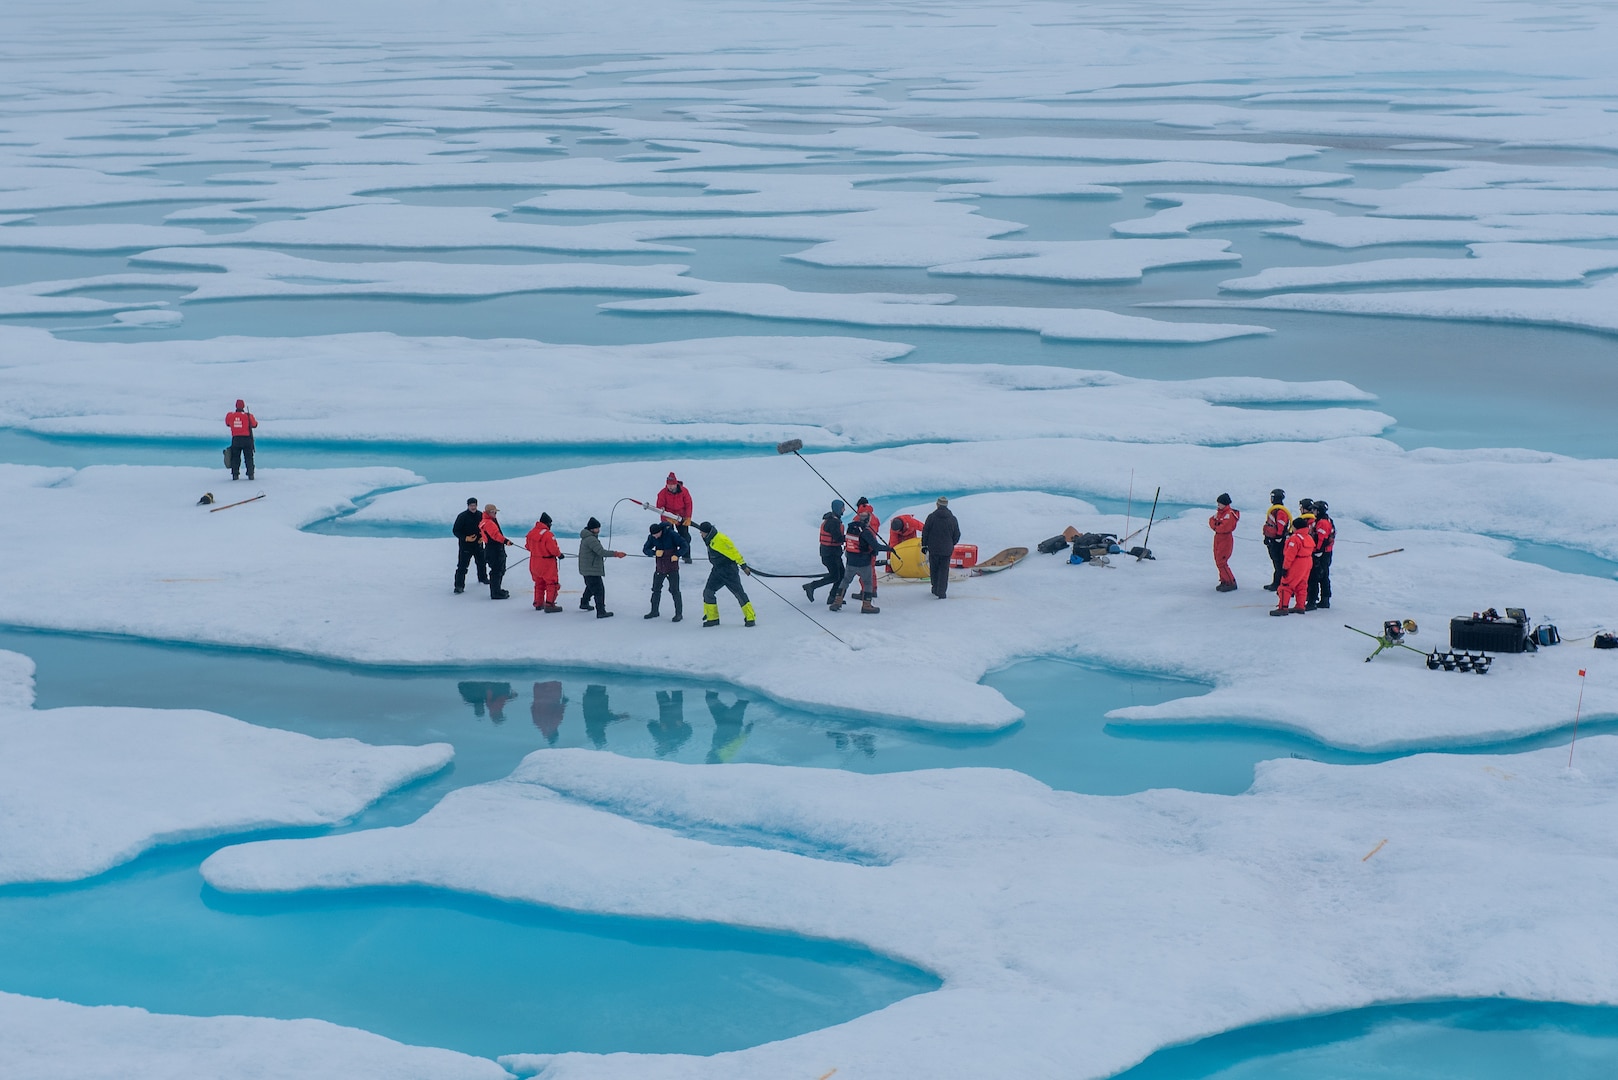 A U.S. Coast Guard Cutter Healy (WAGB 20) crew and researchers install equipment on a floe of multi-year ice in the Beaufort Sea, Aug. 9, 2023. Healy is the Coast Guard’s only icebreaker specifically designed for Arctic research, as well as the nation’s sole surface presence routinely operating in the Arctic Ocean.  (Coast Guard photo by Petty Officer 3rd Class Briana Carter)